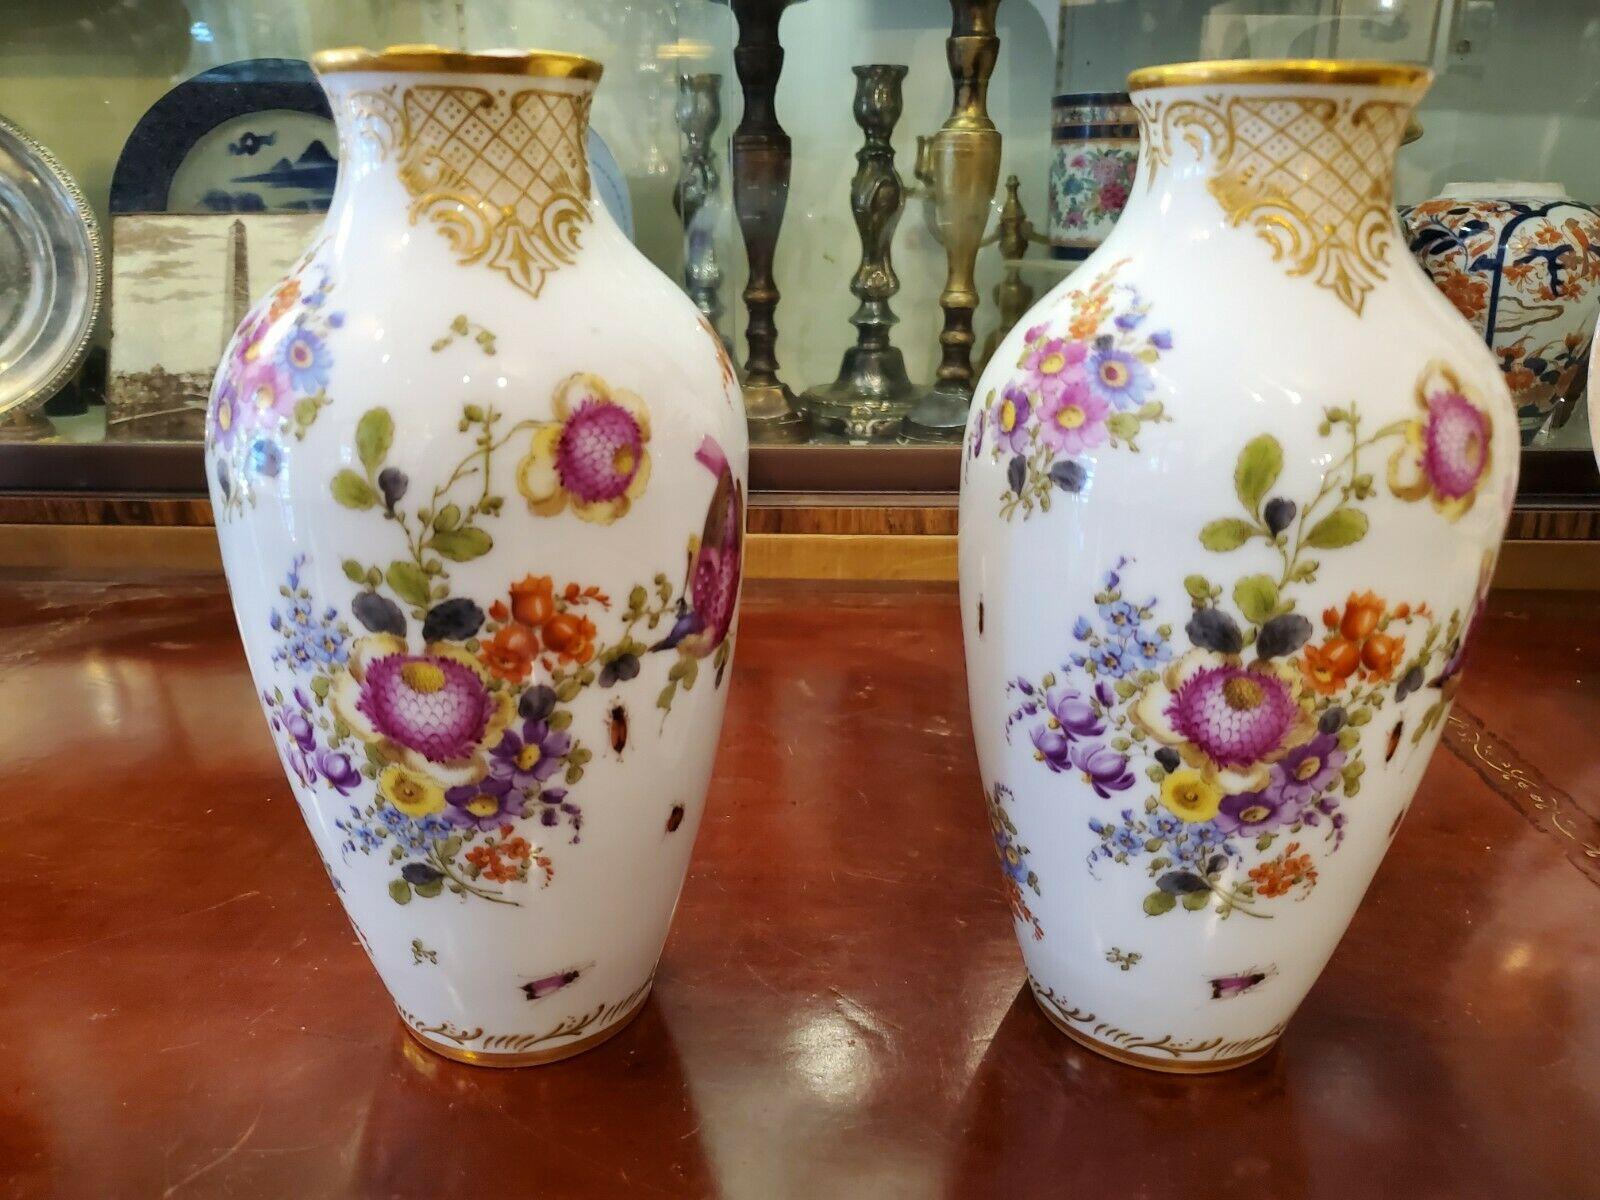 Pair of English Chelsea porcelain vases from the 18th century.

This pair of vases are 9 inches tall and bear the Gold Anchor mark. 

Beautifully decorated with a floral design and in generally good condition despite their age.